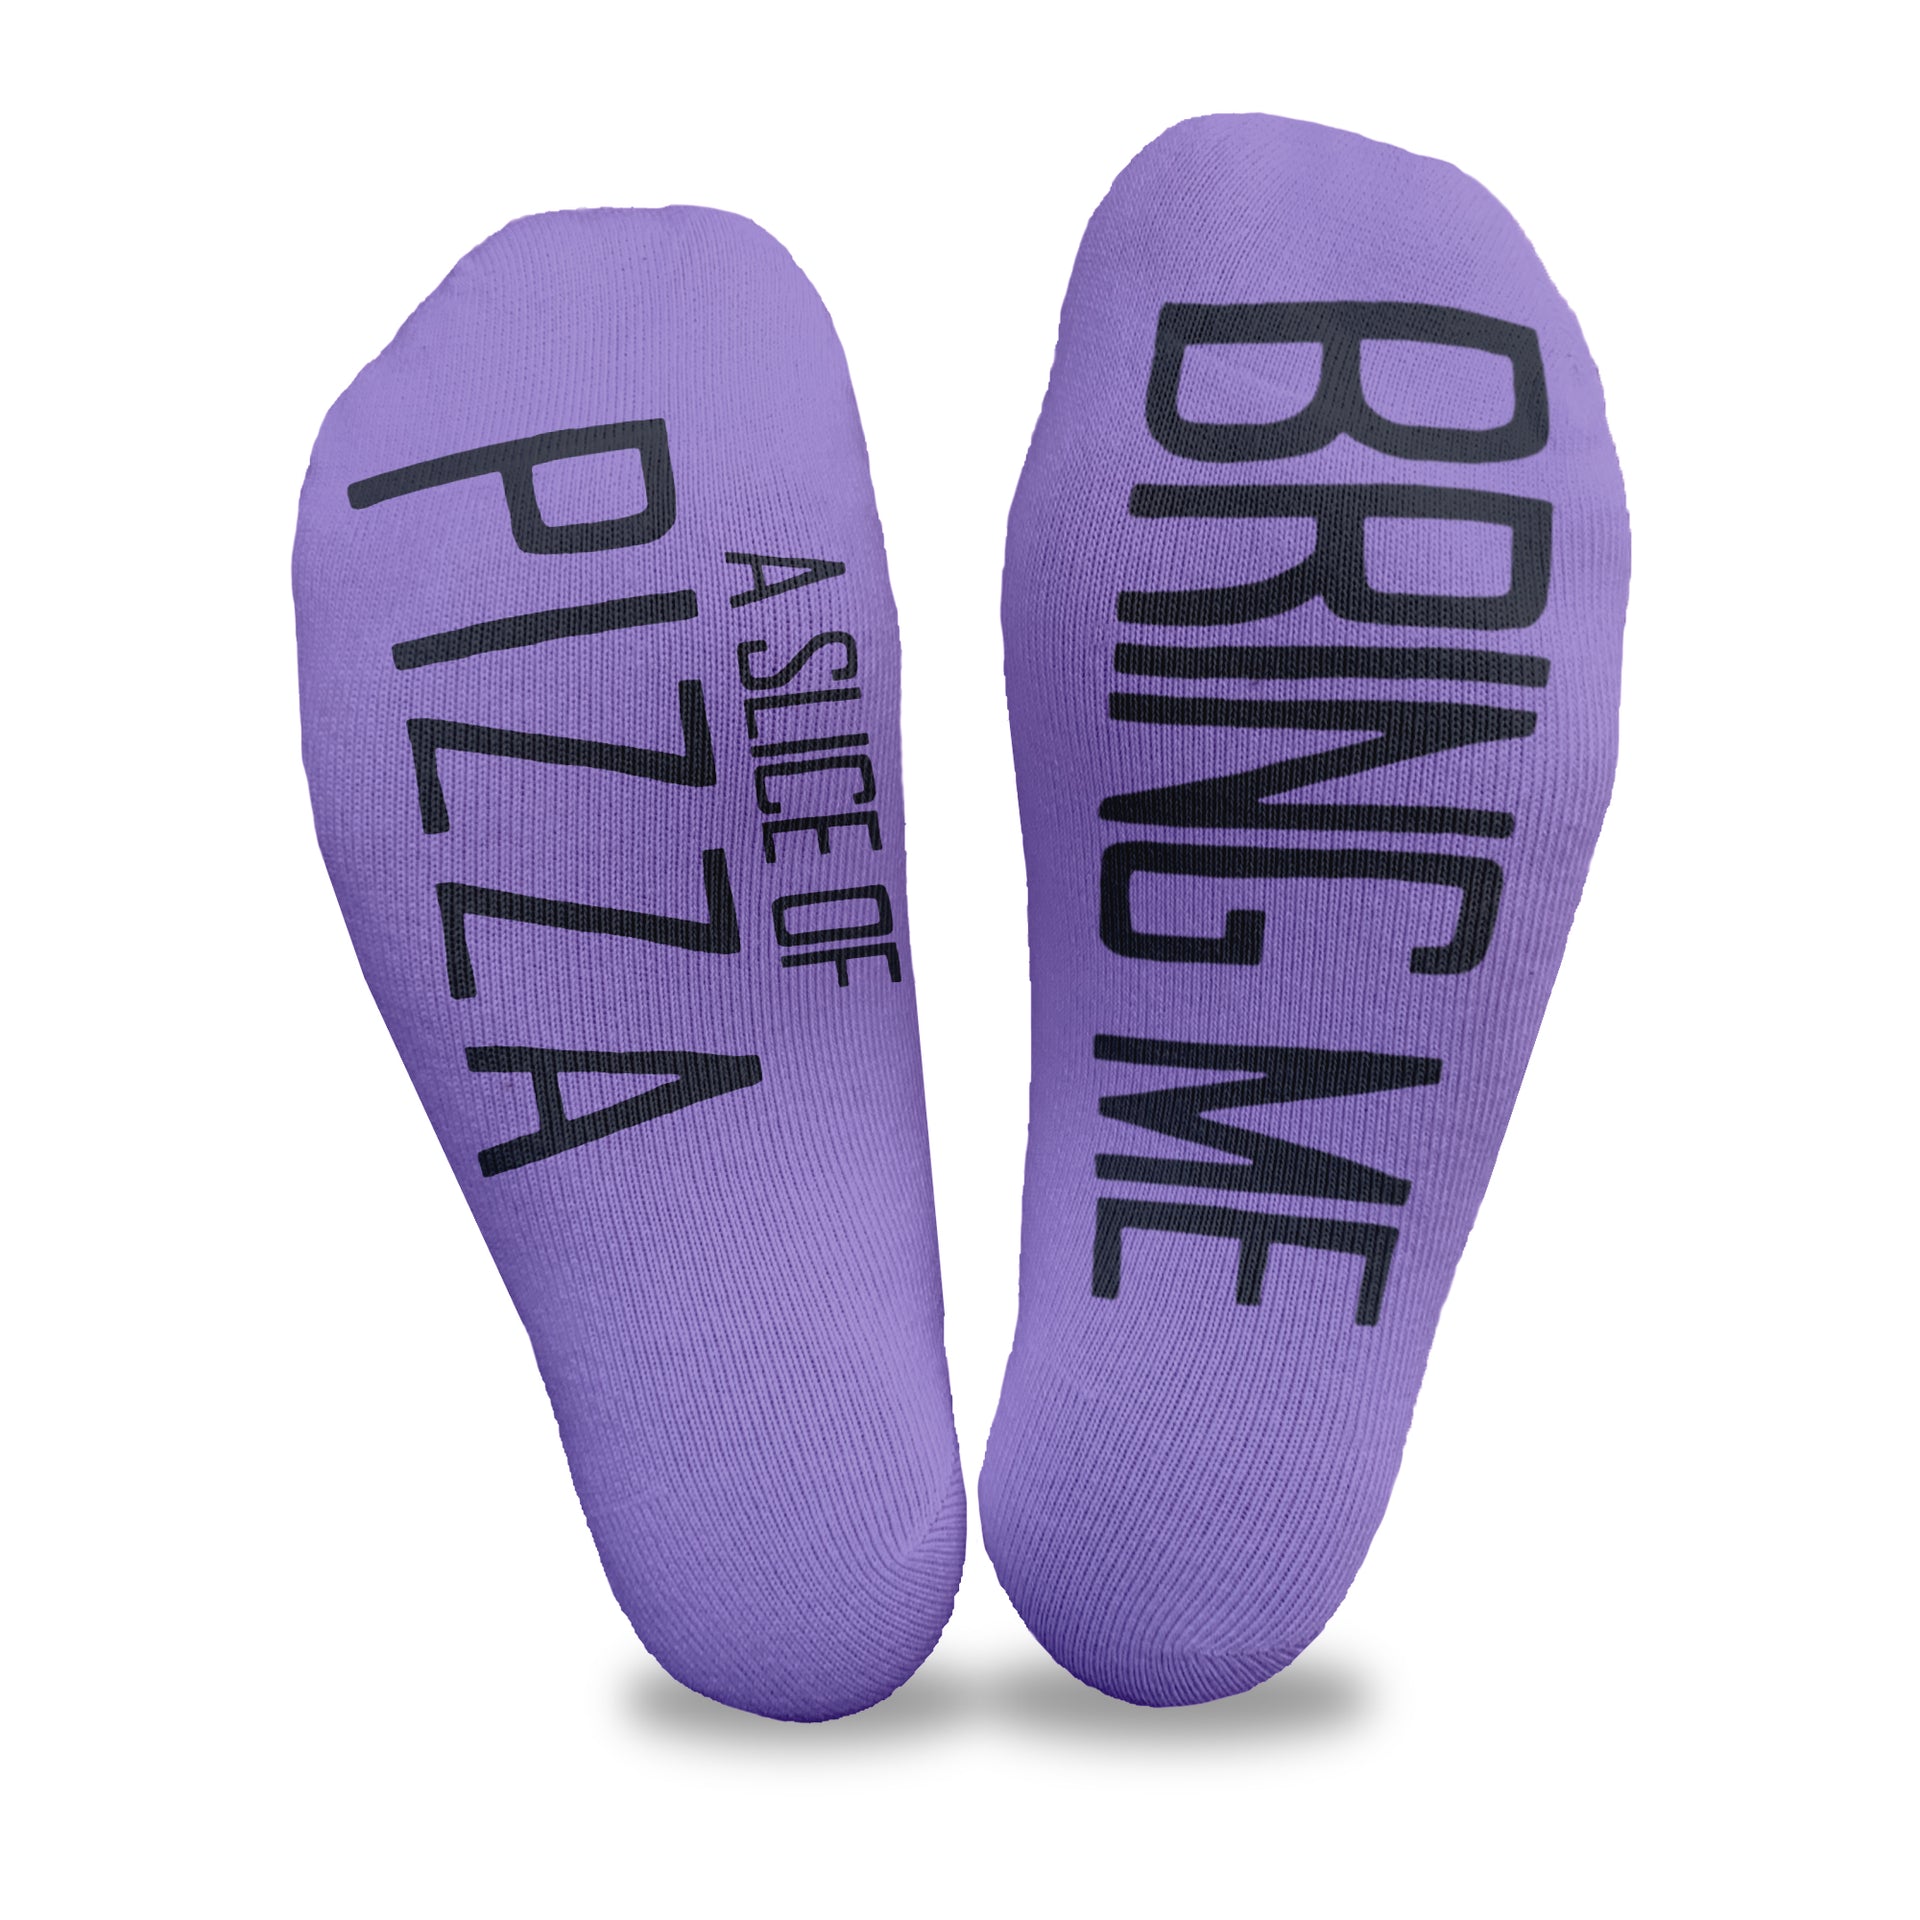 Bring me a slice of pizza custom printed in black ink on the bottom soles of purple cotton no show socks is a fun way to ask your kids for some pizza!